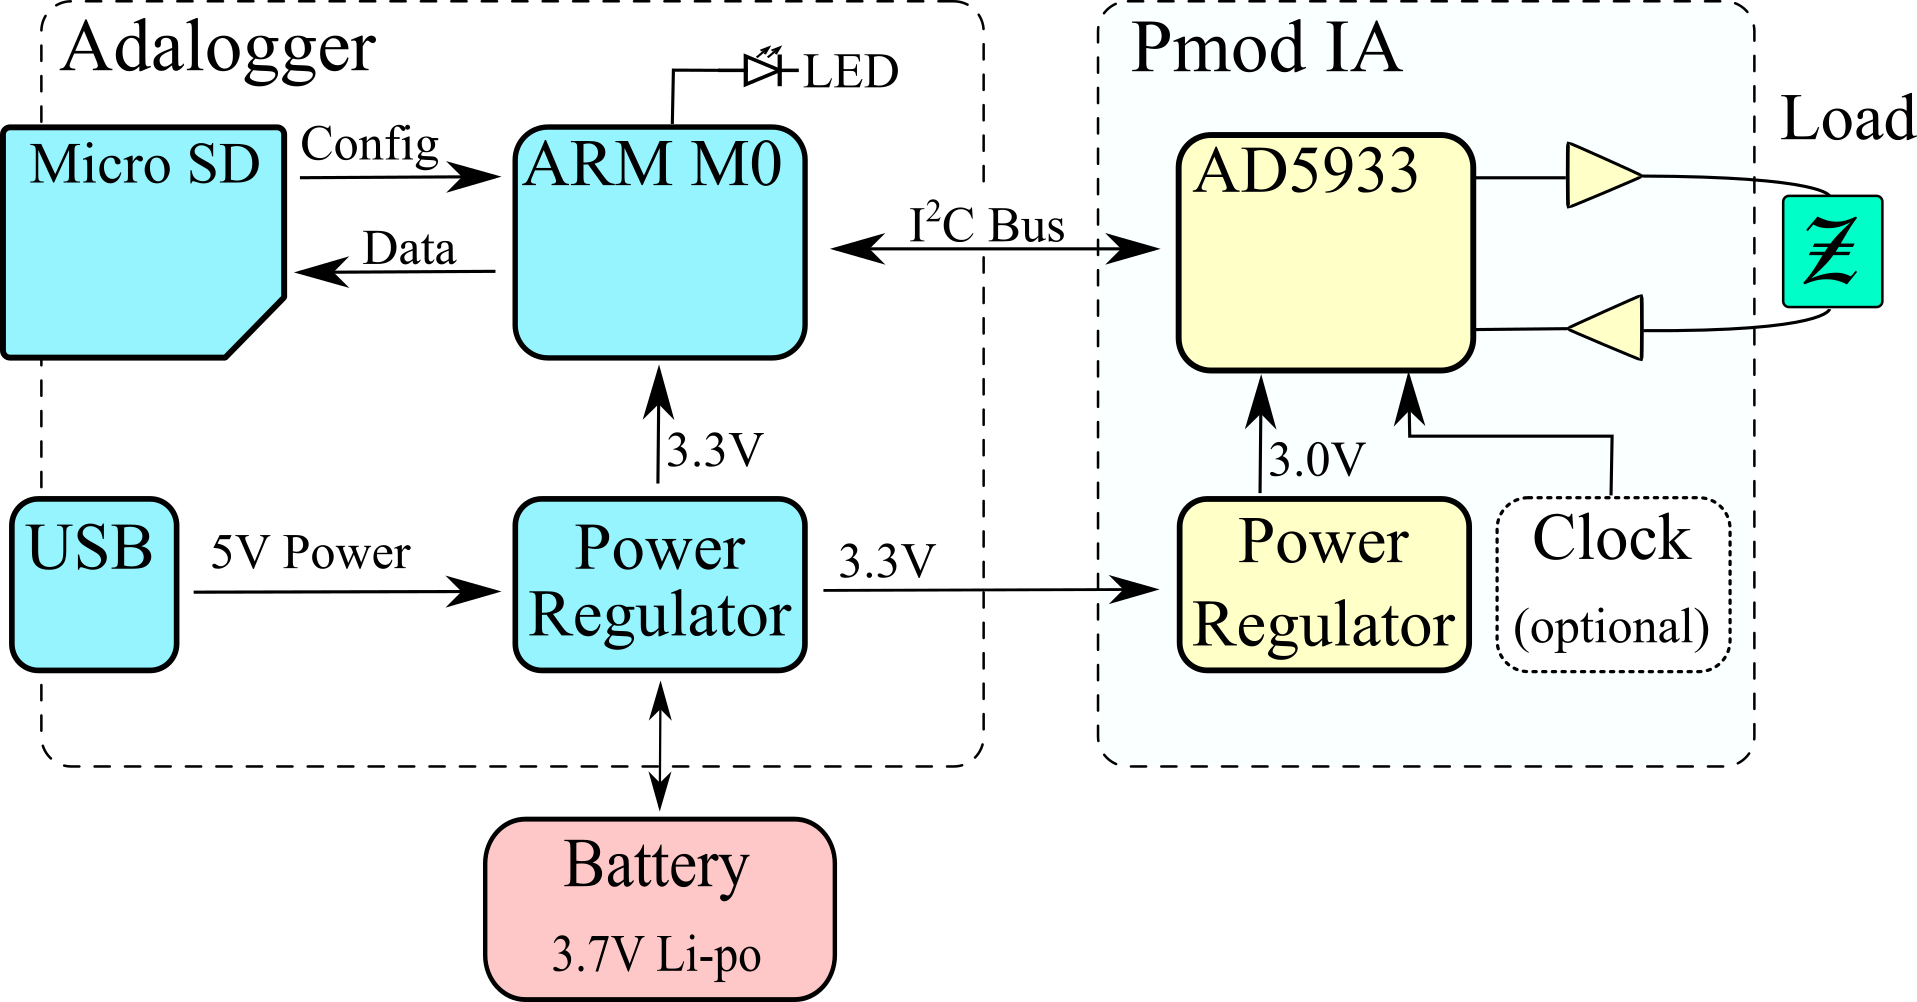 A block diagram of the Canary IL system I designed for my thesis.